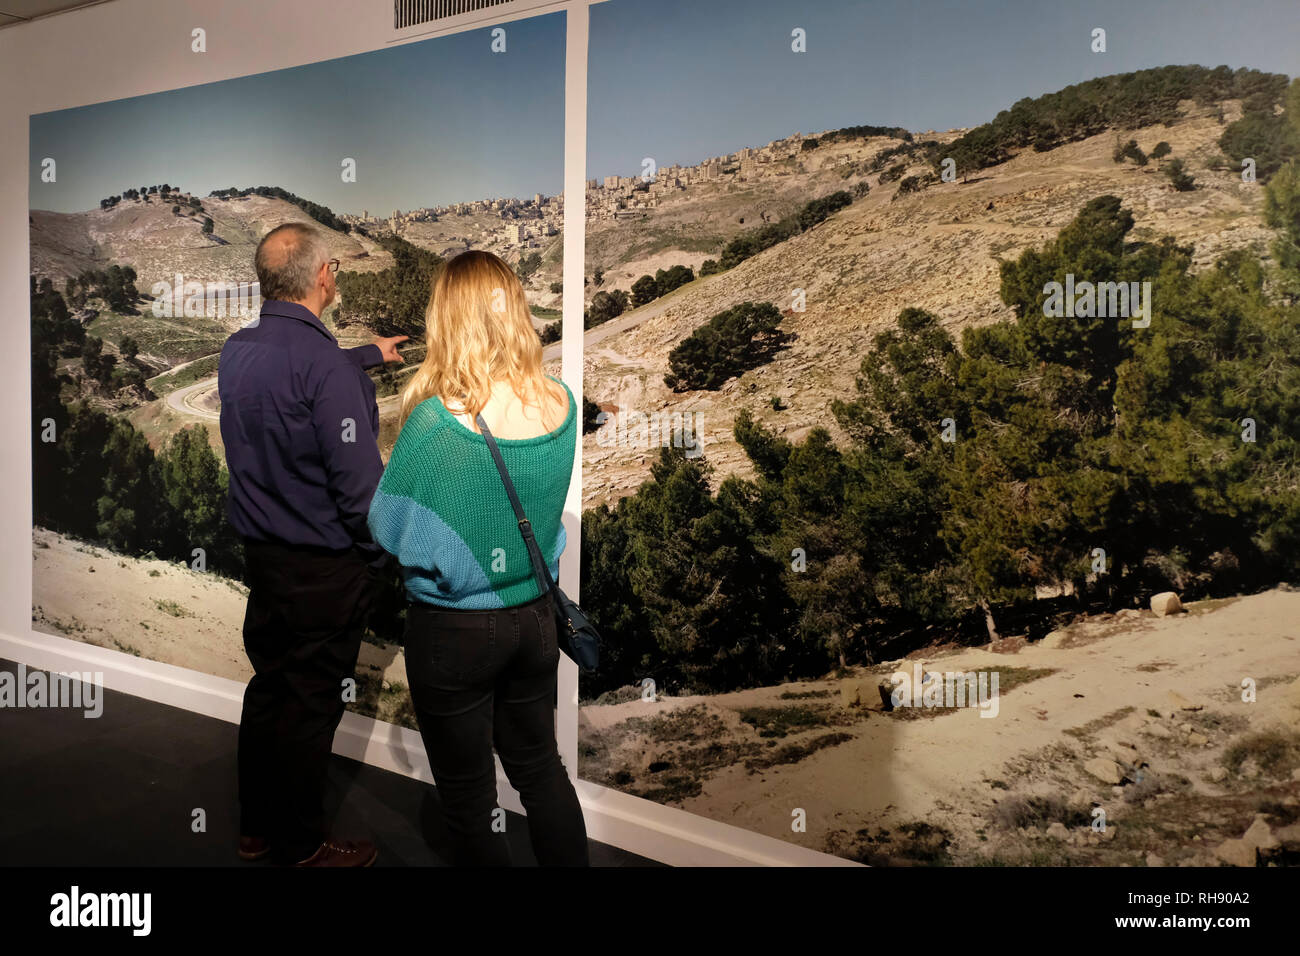 Jerusalem Israel, 01 February 2019. Israeli visitors view the work of Israeli photographer and artist Yaakov Israel entitled 'Legitimacy of Landscape' exhibited at the Museum for Islamic Art in West Jerusalem Israel. The exhibition provokes thought about places that have been forgotten in Israeli society and summarizes a 16 year project during which Yaakov took photographs of Arab, Bedouin and Druze villages in Israel and the Occupied Territories, a sort of voyage through the sociopolitical landscapes of the country. Stock Photo